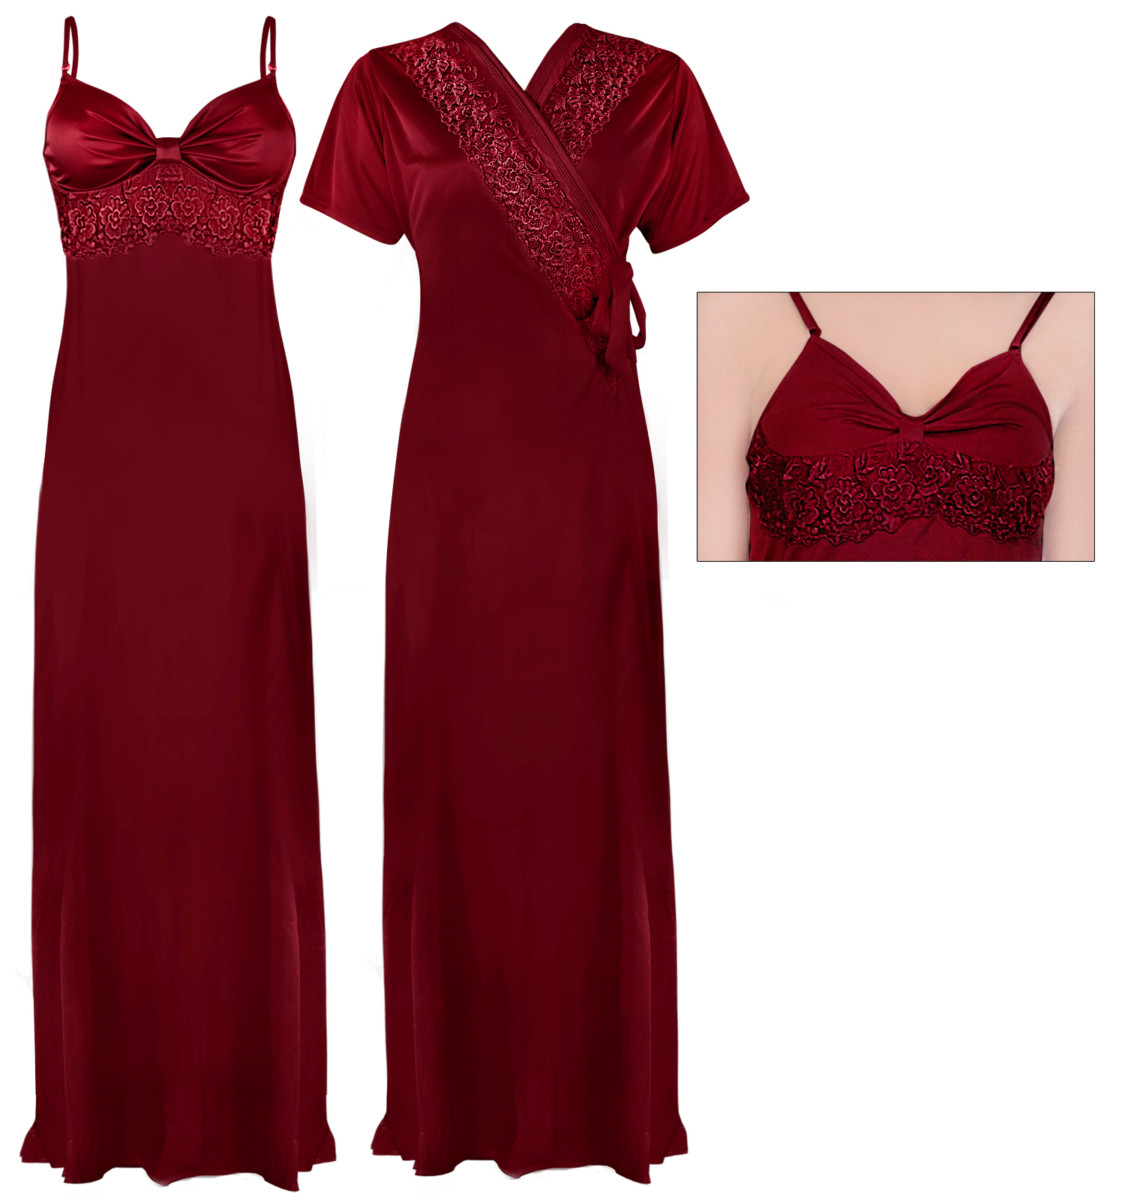 LADIES SATIN LACE LONG NIGHTDRESS NIGHTY CHEMISE EMBROIDERY DETAILED